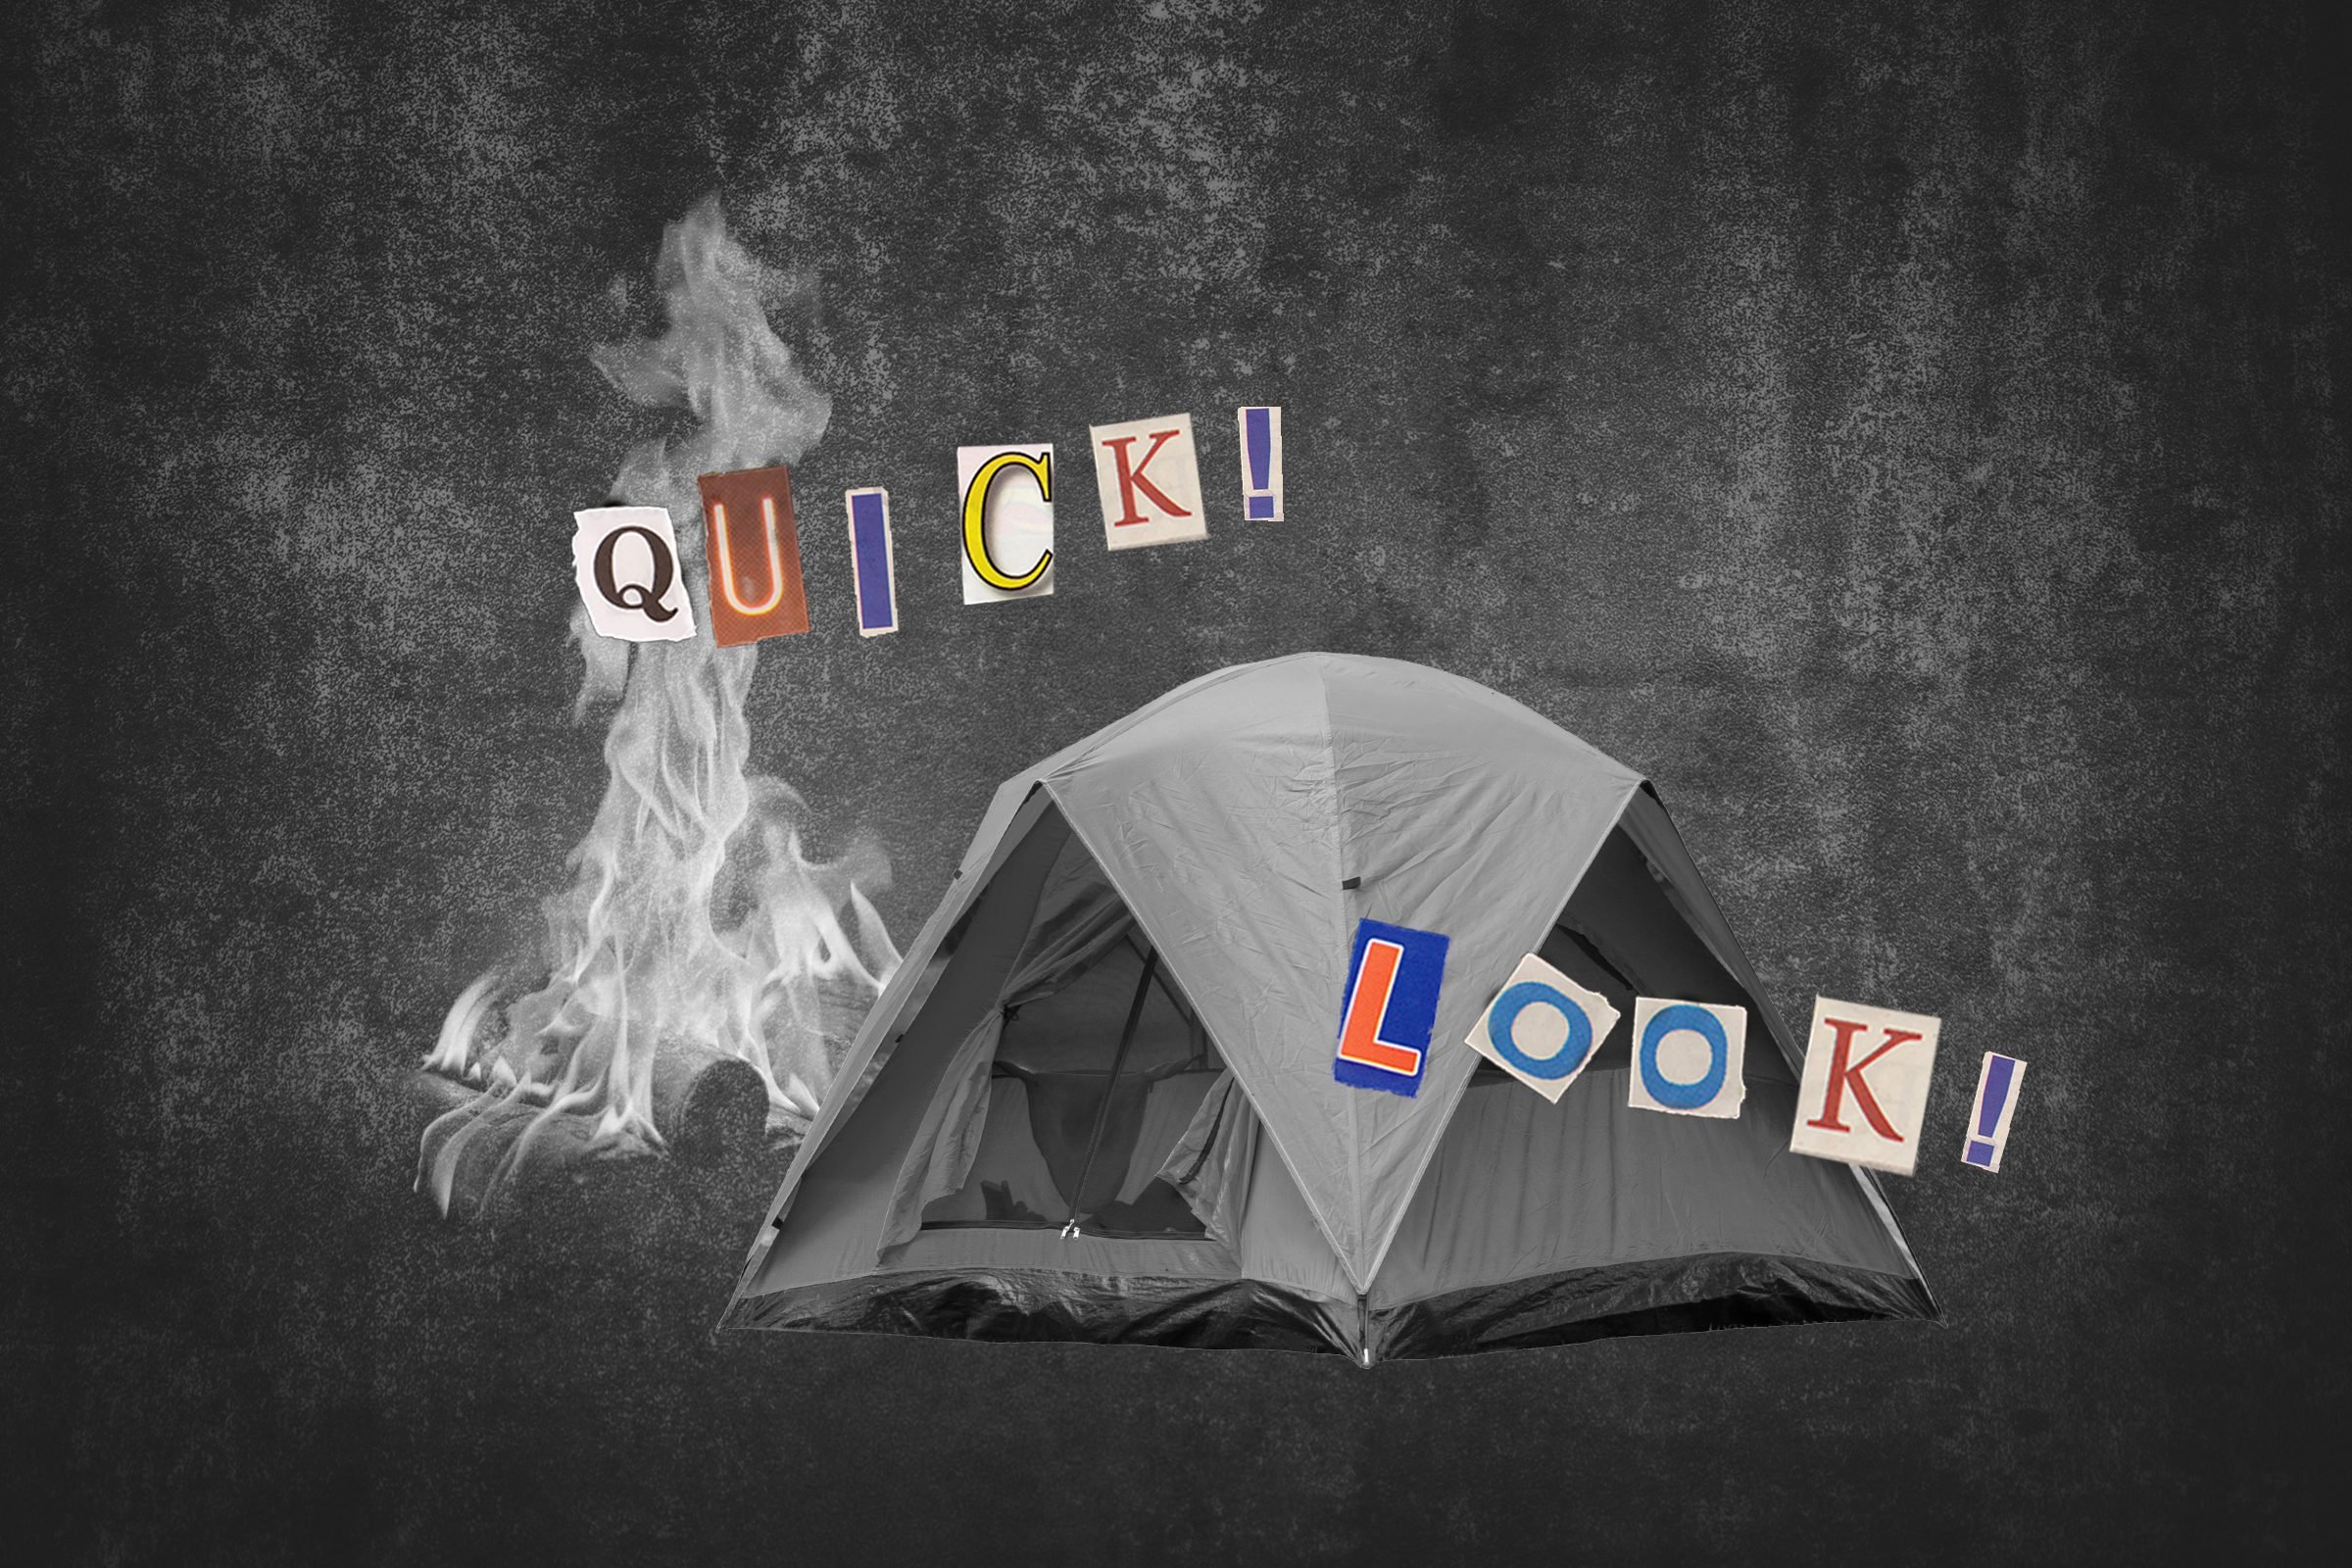 Tent And Campfire With Text Quick, Look